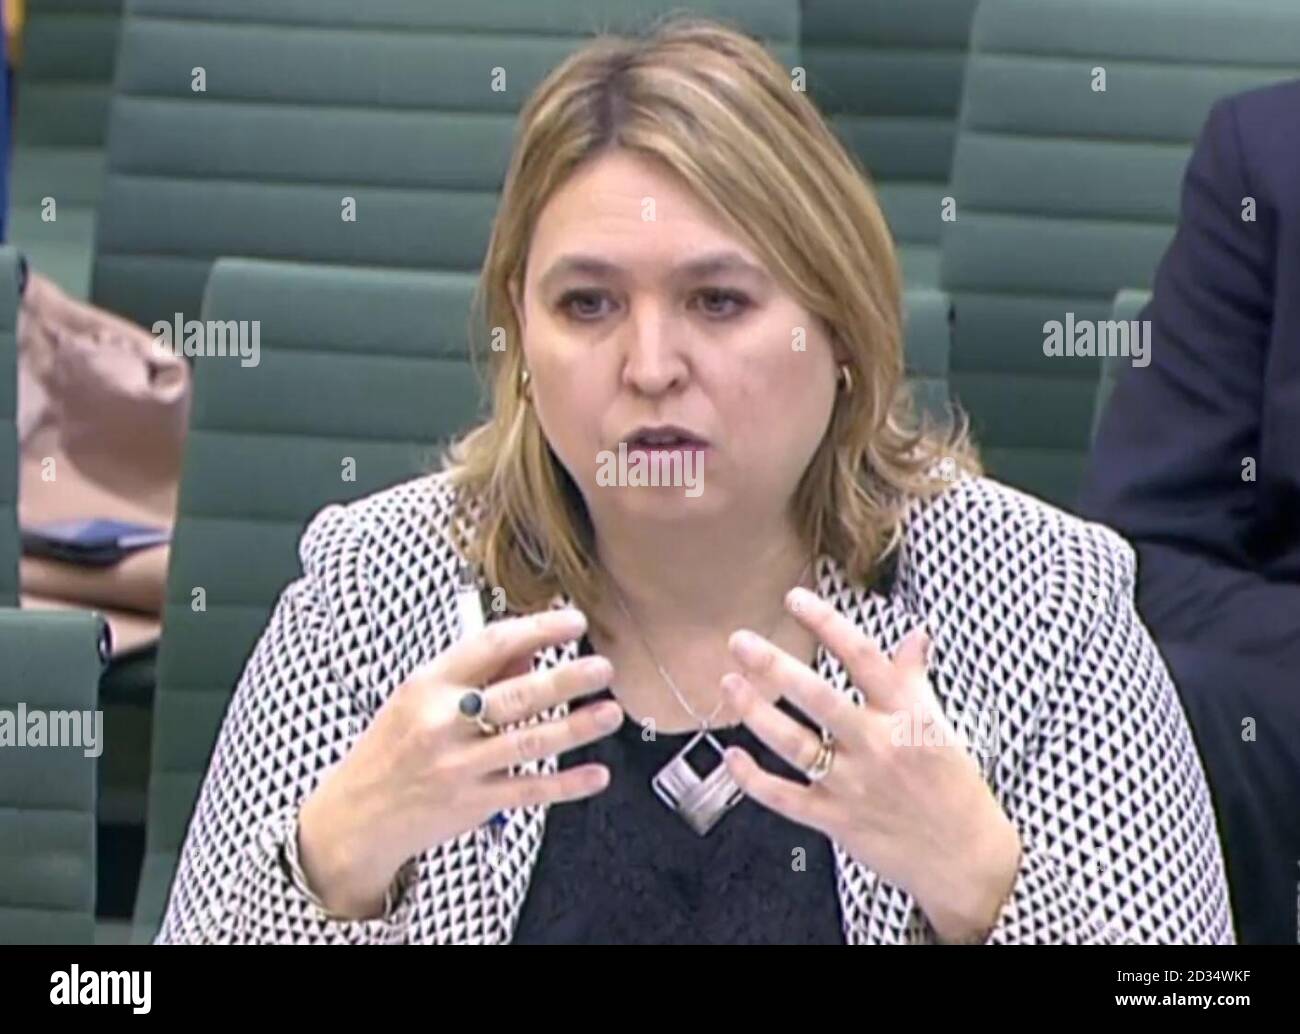 Karen Bradley, Secretary of State for Northern Ireland gives evidence before the Northern Ireland Affairs Committee at Portcullis House, London on matters relating to Northern Ireland after Brexit. Stock Photo